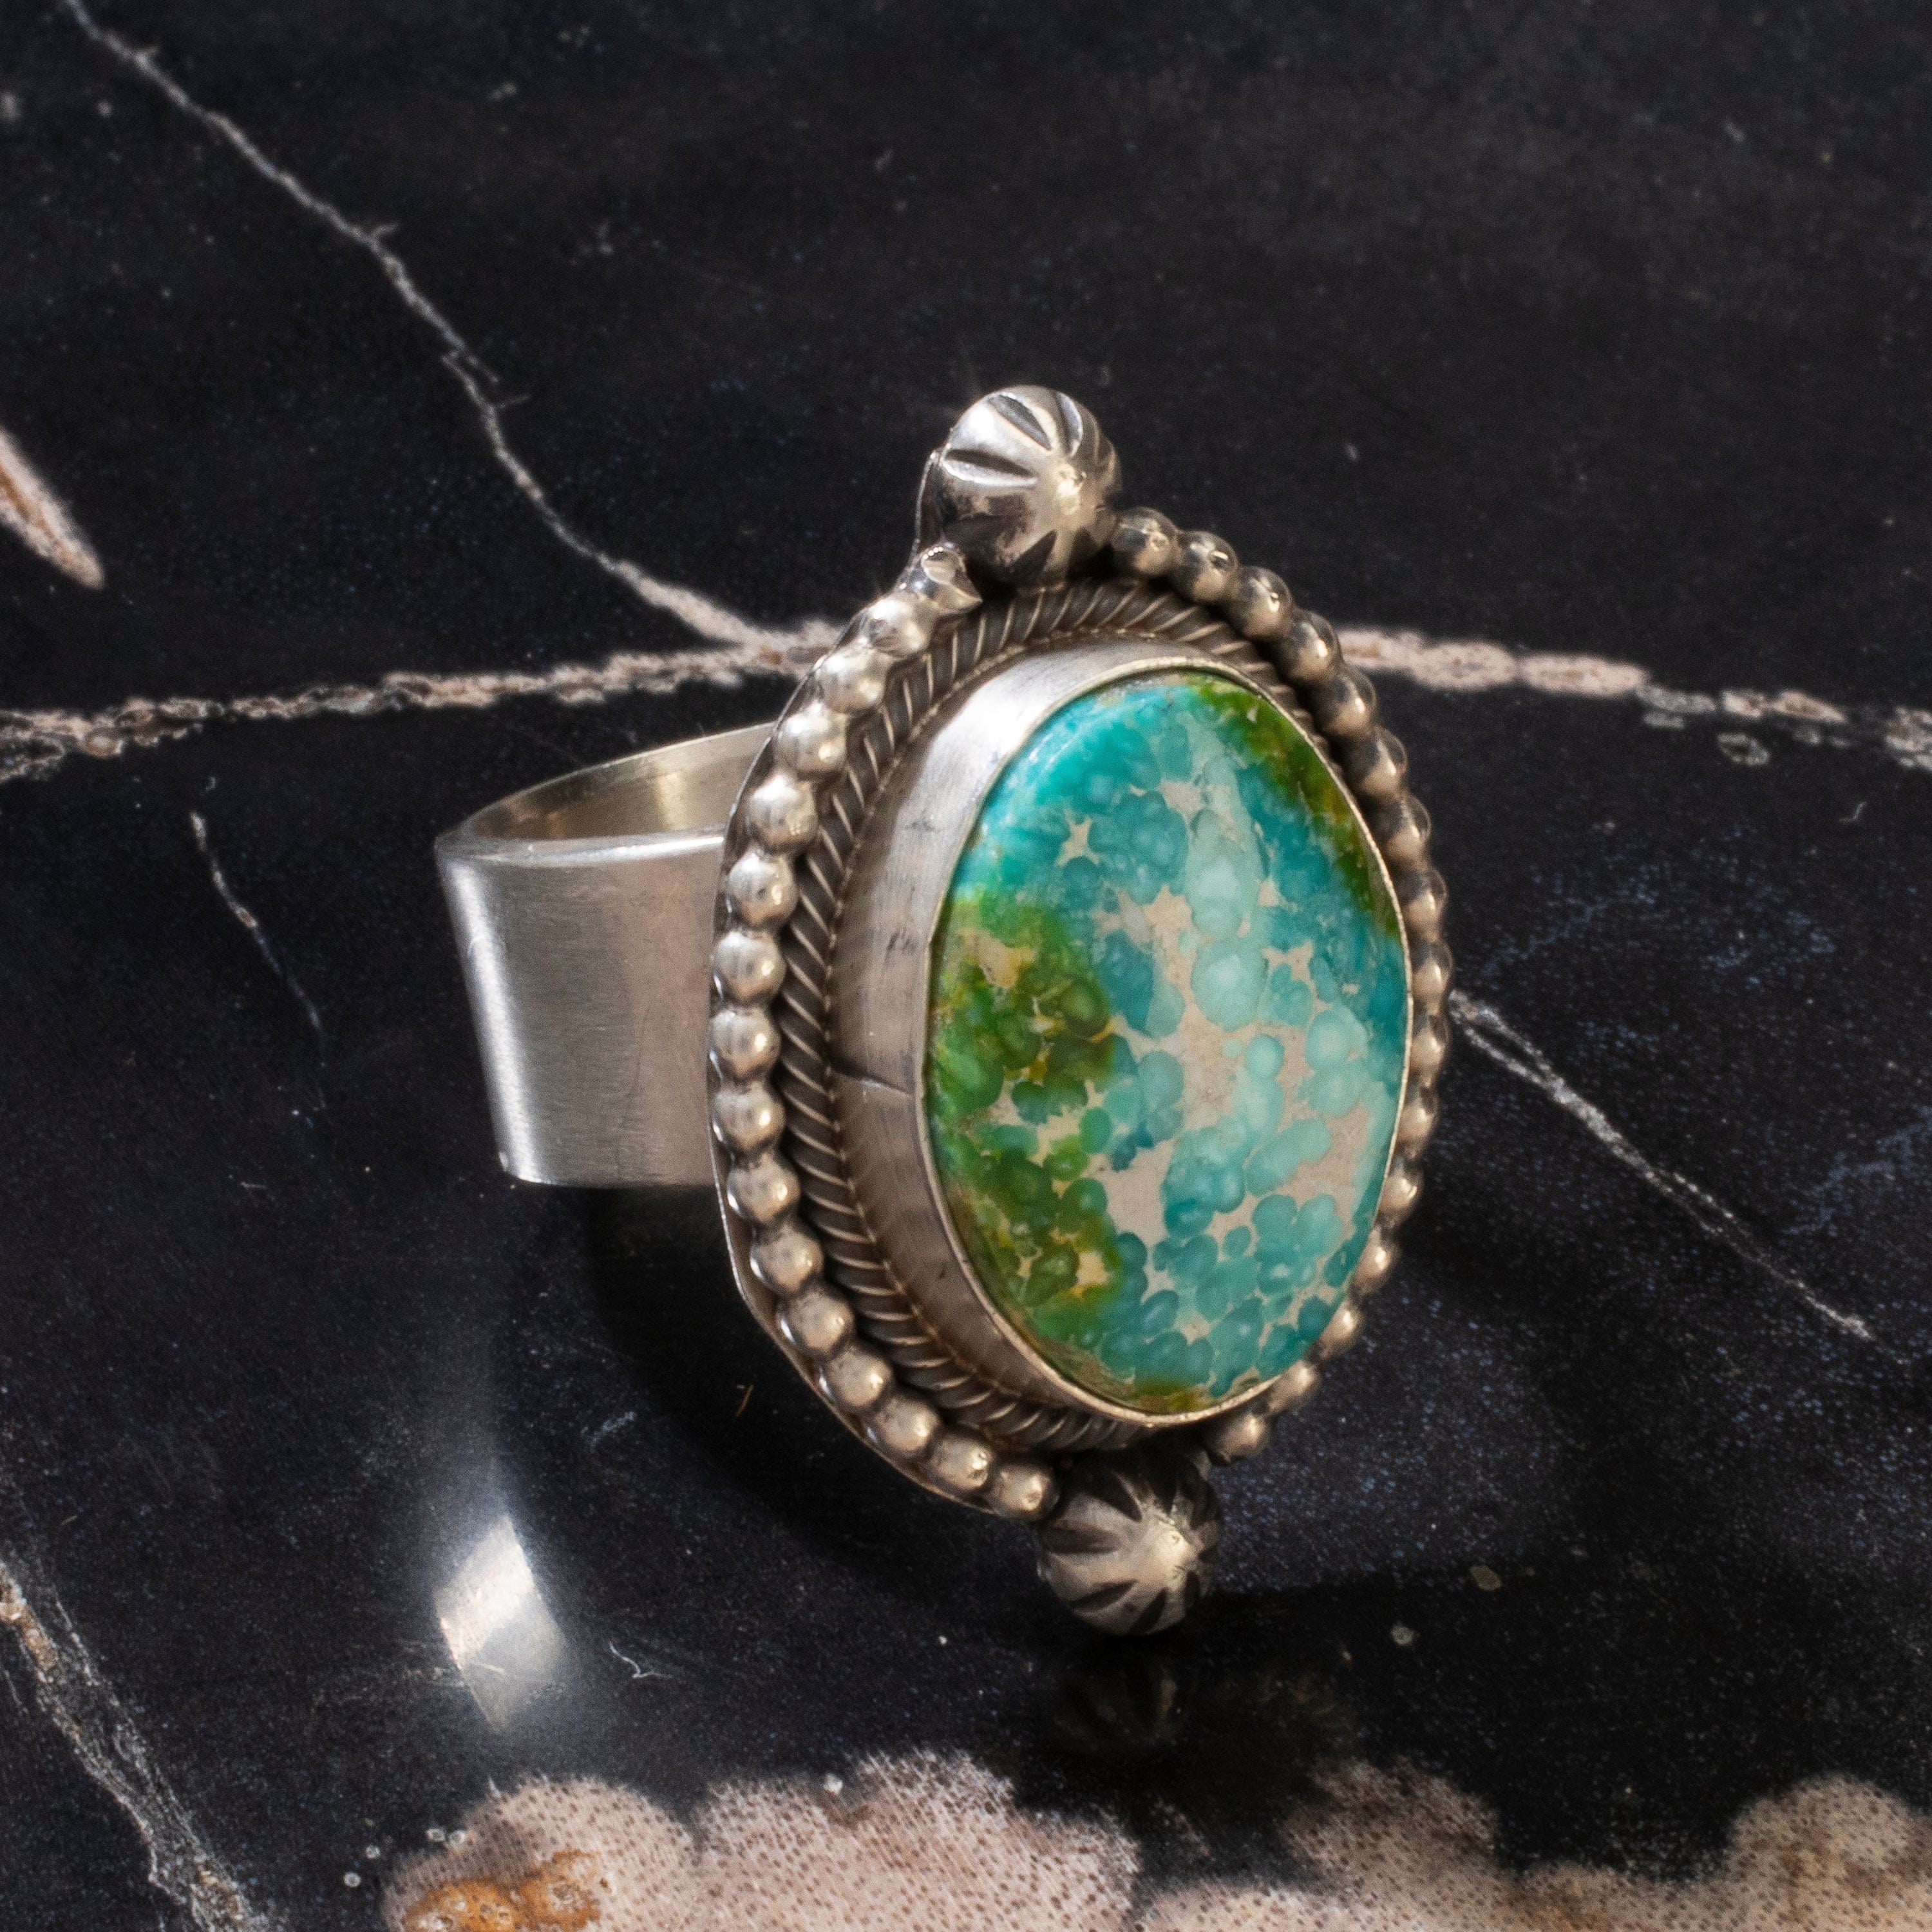 Kalifano Native American Jewelry 7.5 Scott Skeets Royston Turquoise Navajo USA Native American Made 925 Sterling Silver Ring NAR900.035.75